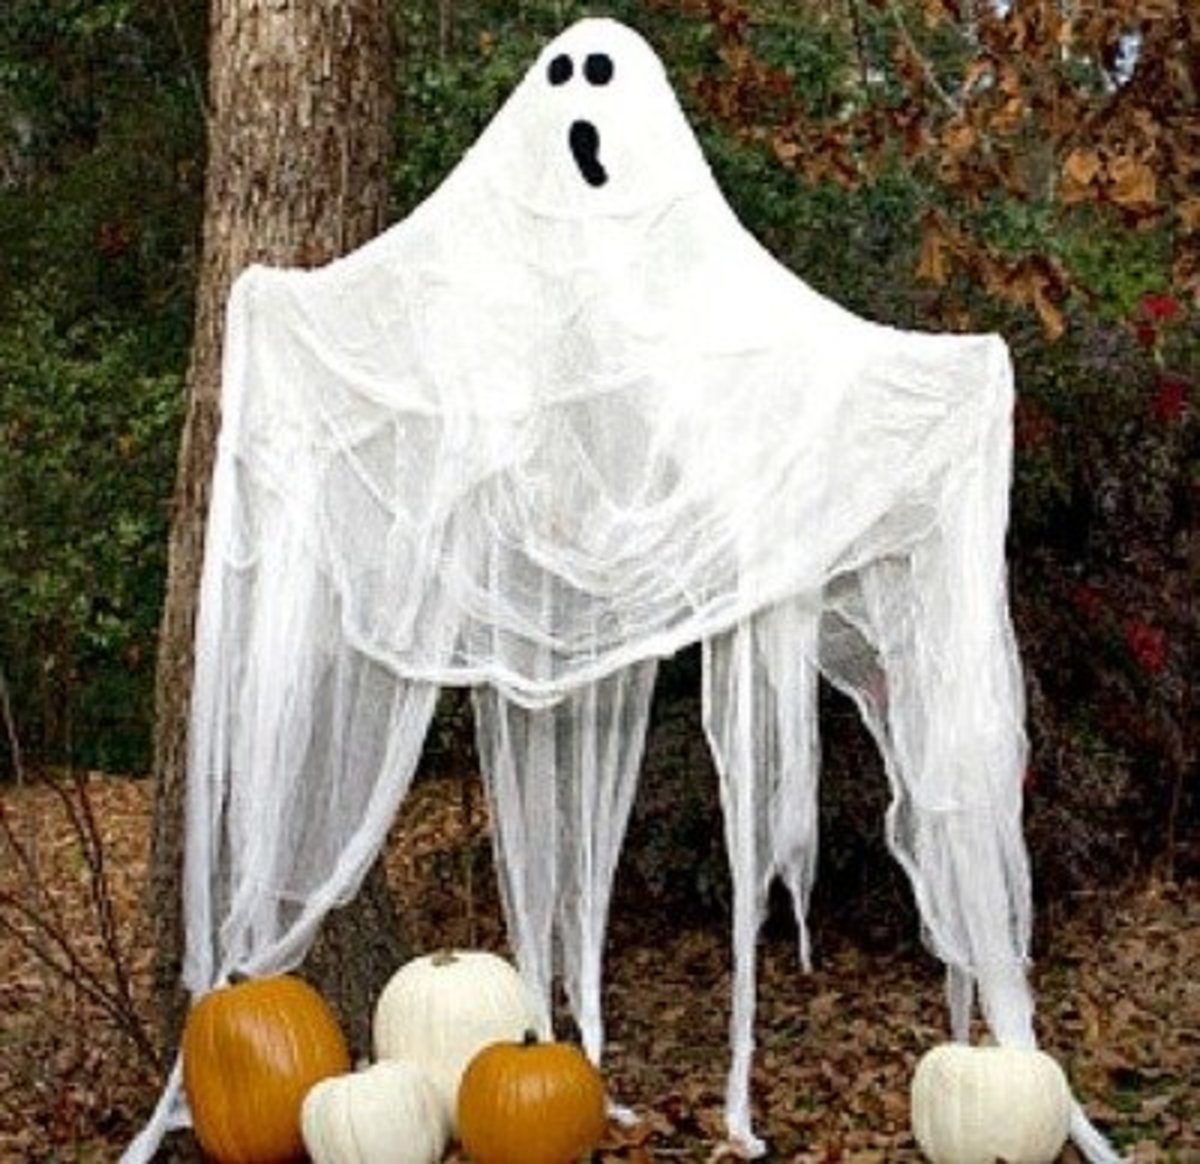 Make an even bigger ghost to hover over your yard.